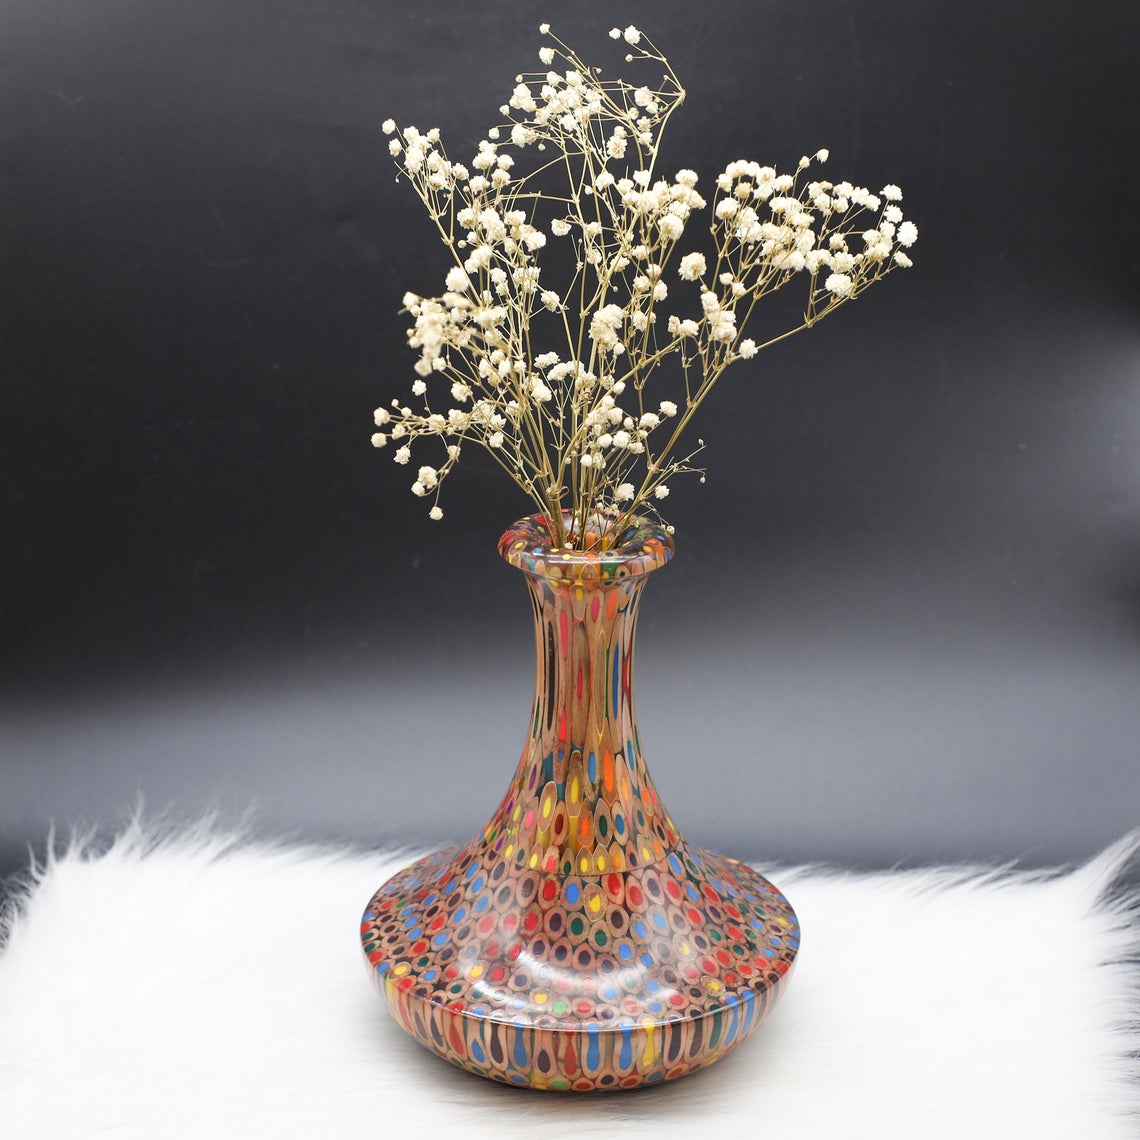 Decorative Colored-pencil High Tower Vase I